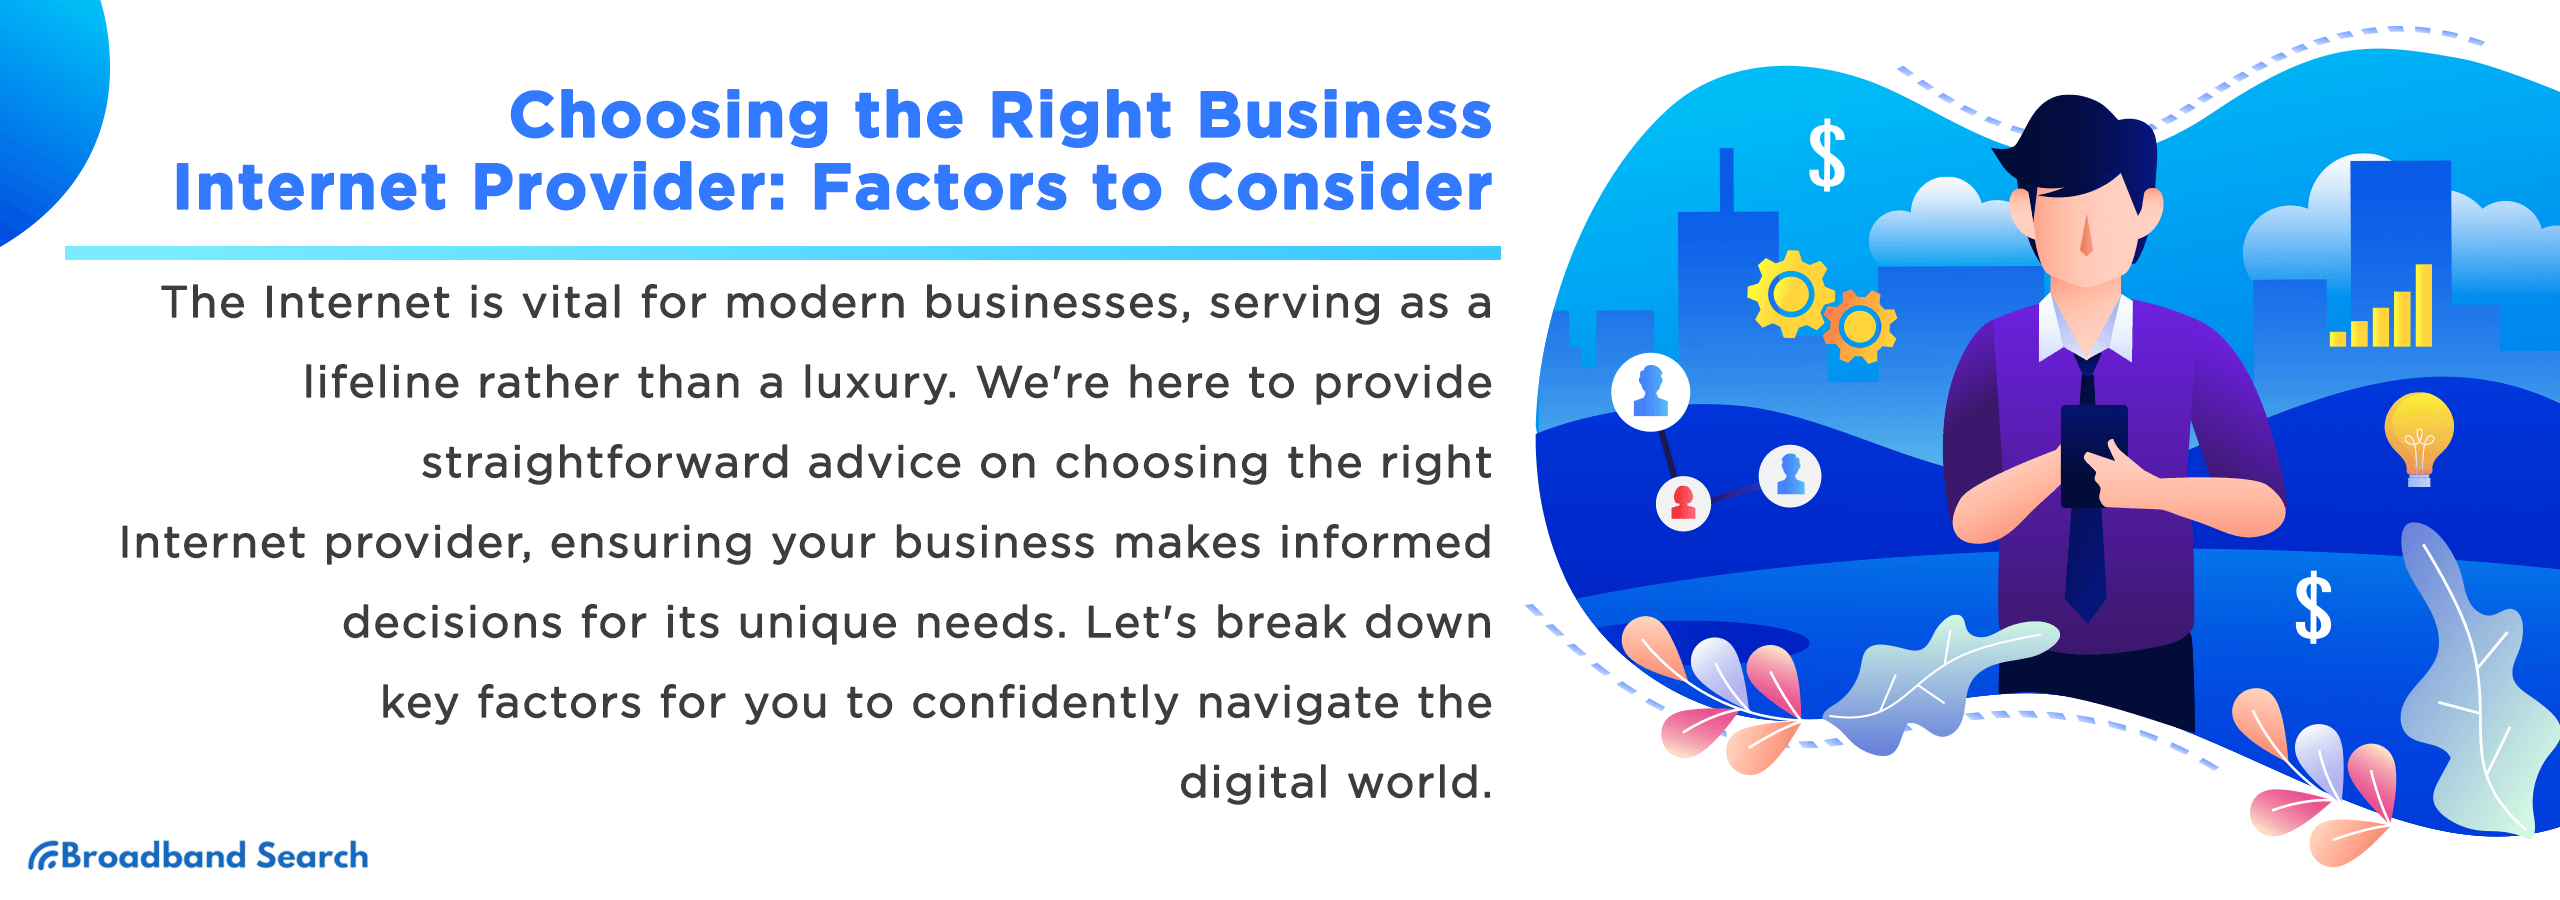 Choosing the Right Business Internet Provider: Factors to Consider